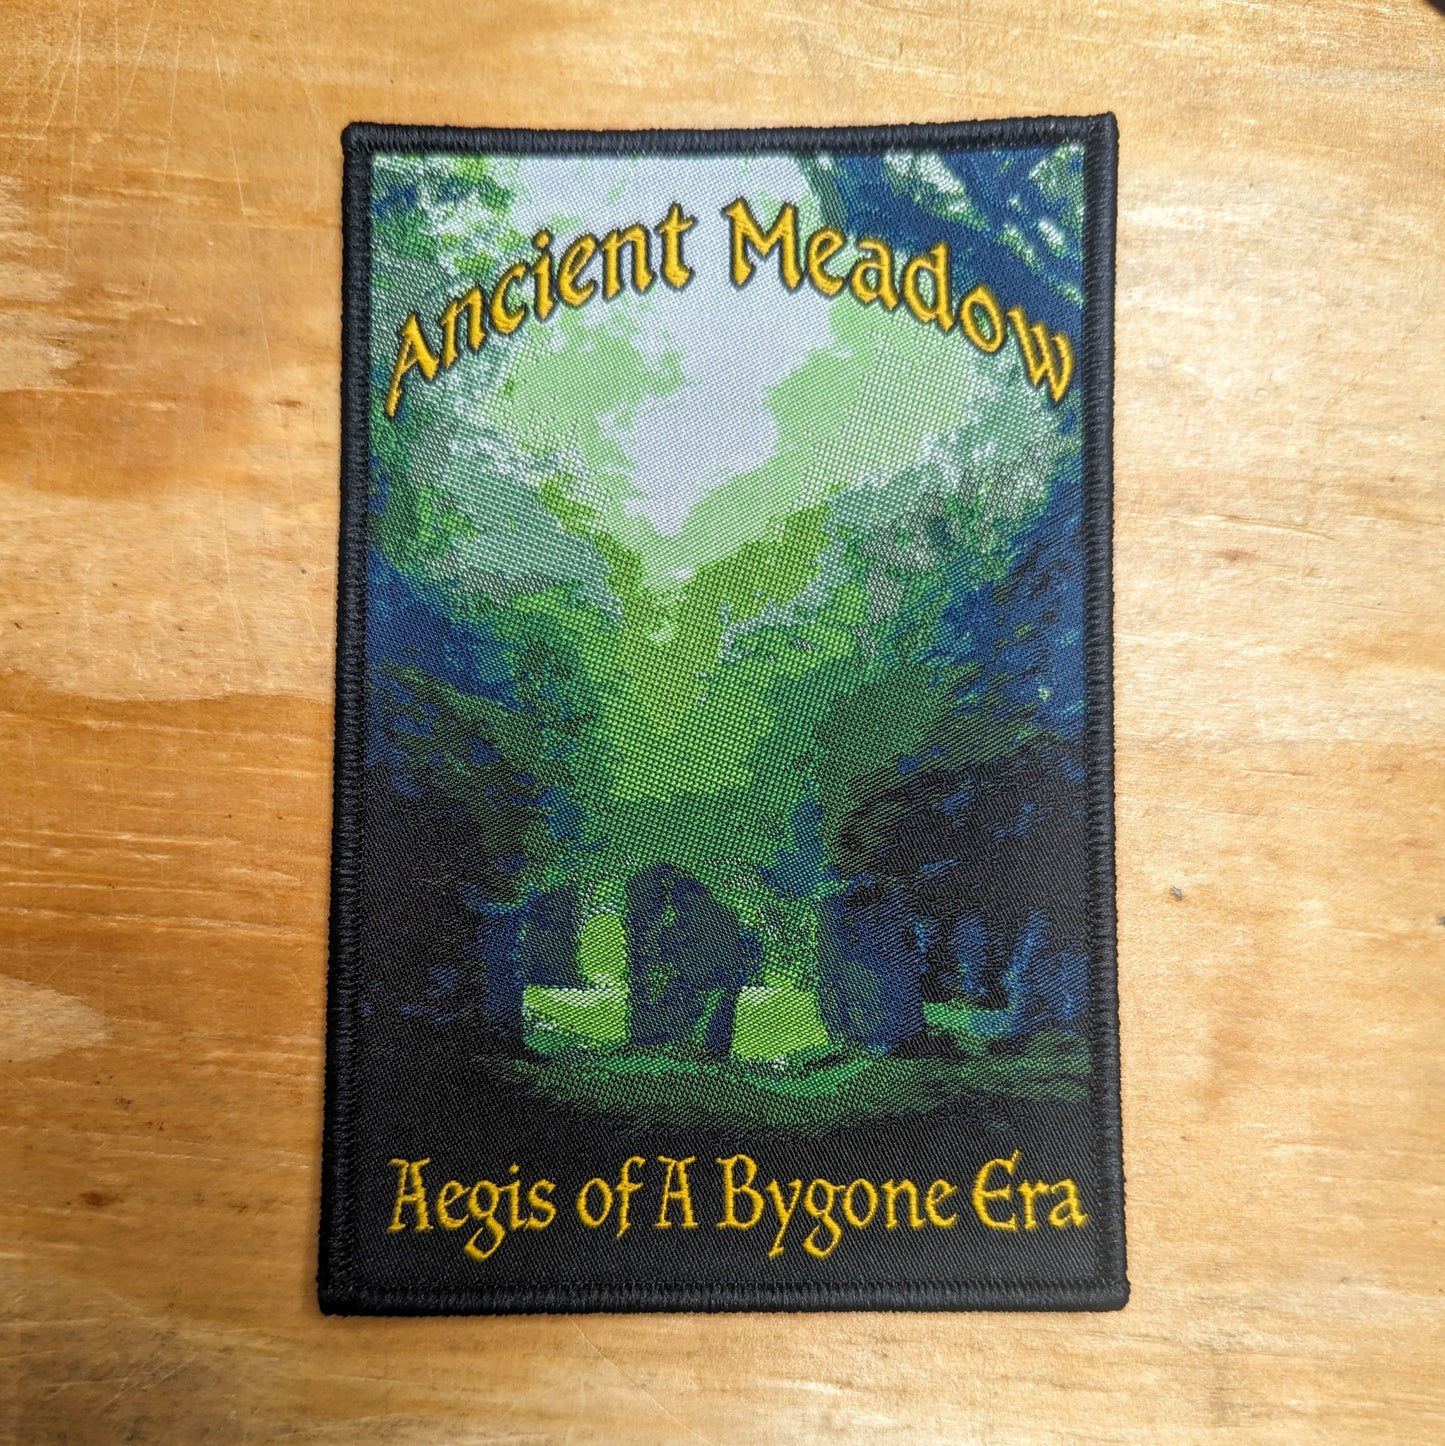 ANCIENT MEADOW "Aegis of a Bygone Era" woven patch (multi color)